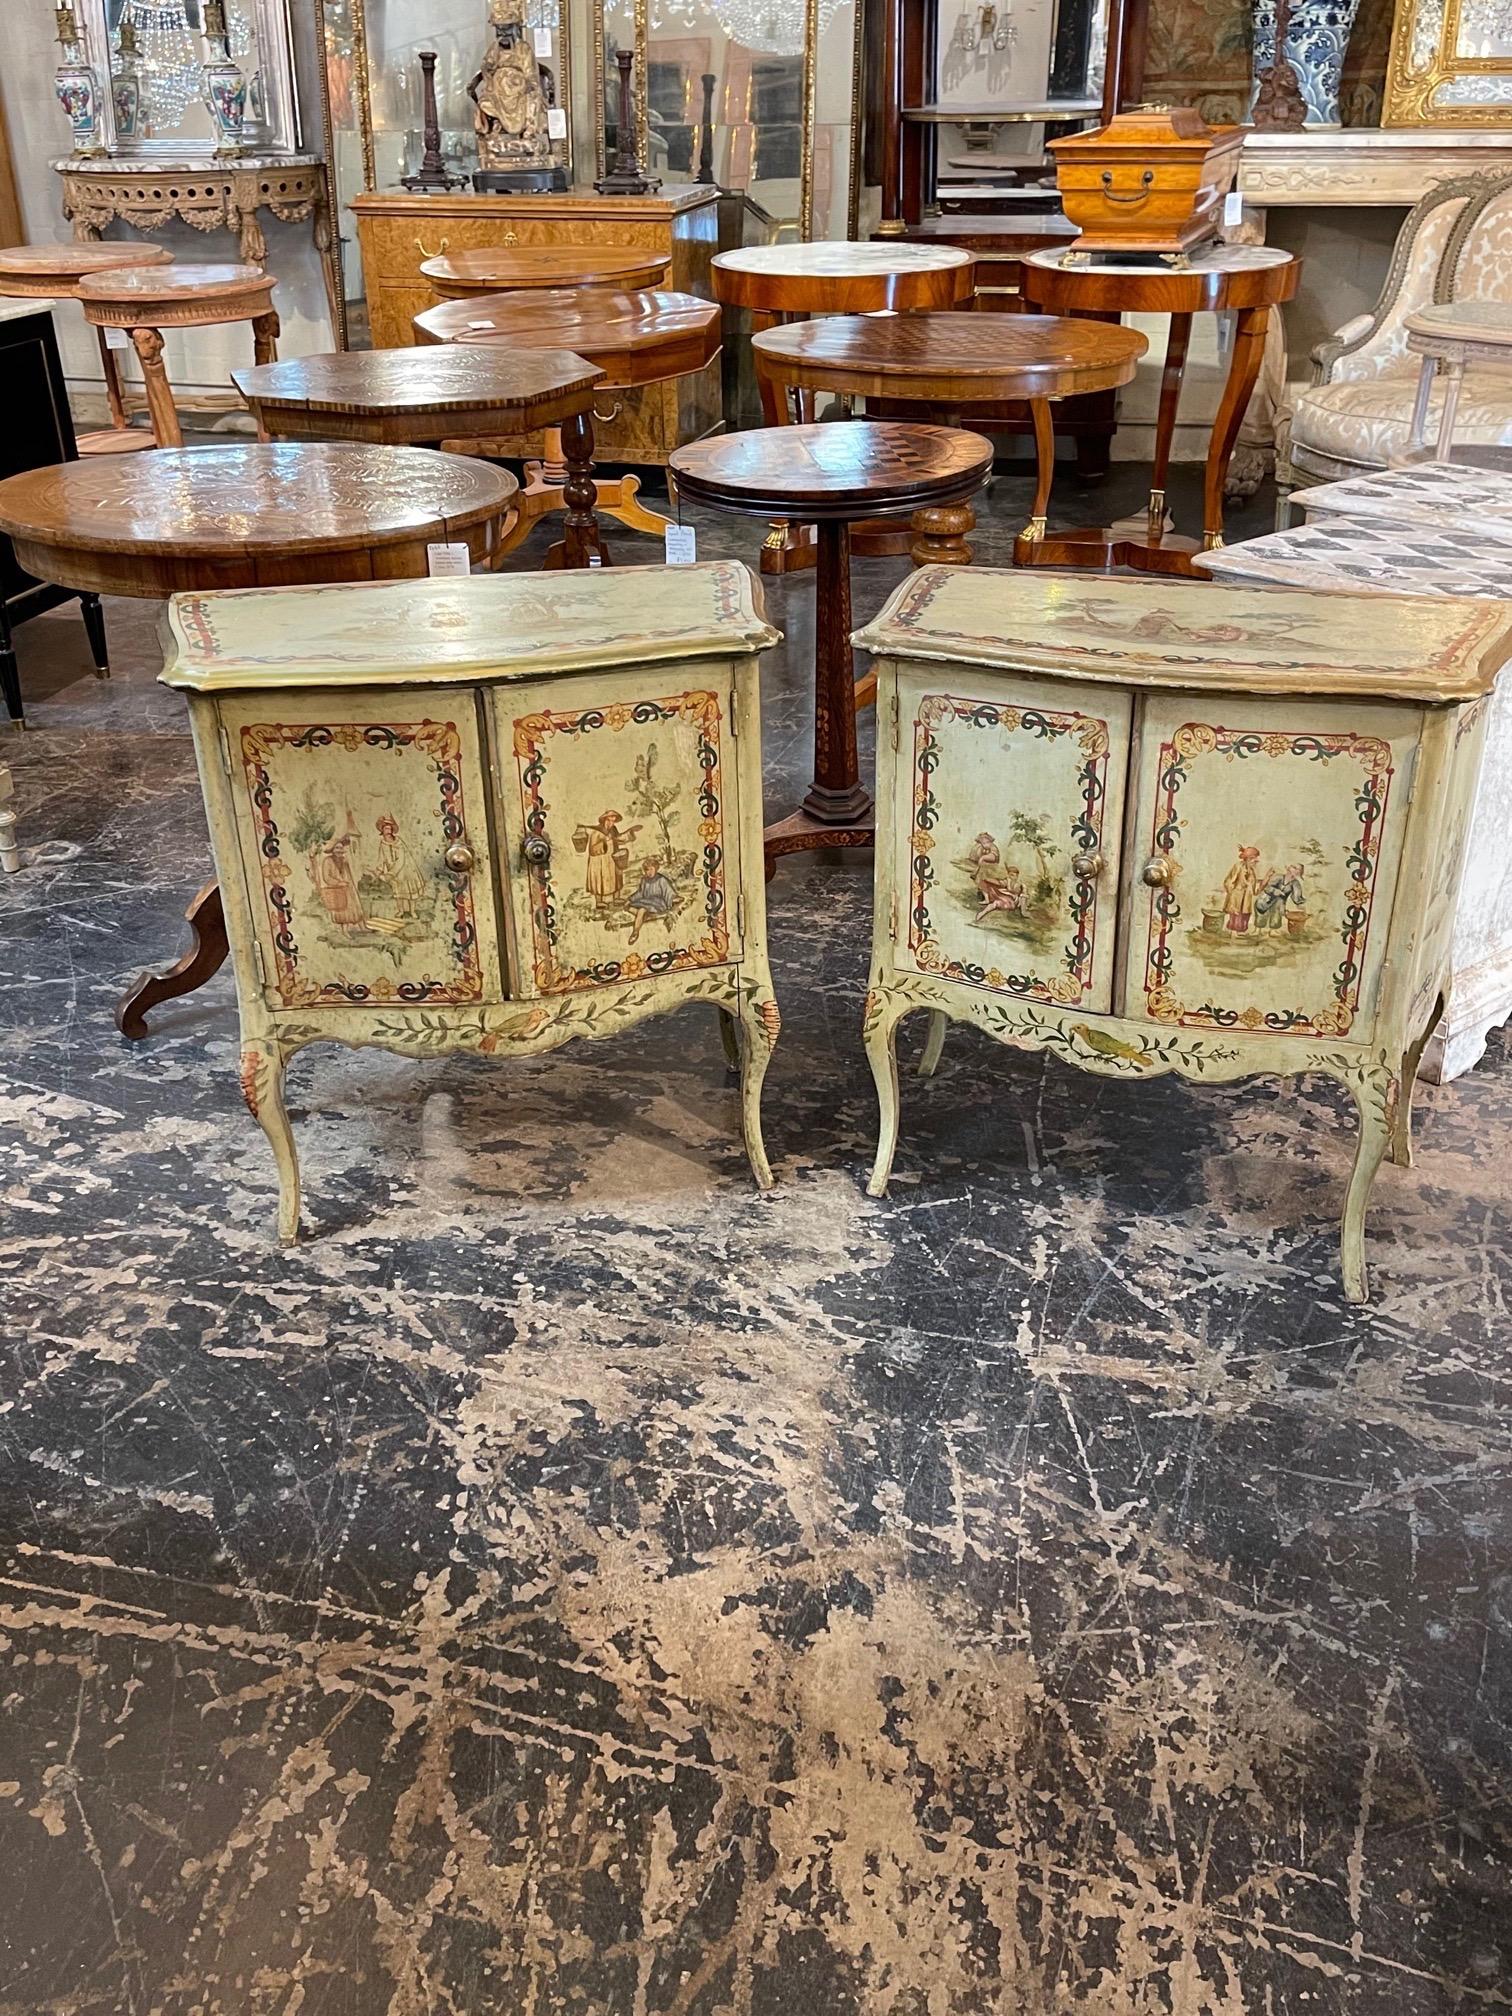 Beautiful pair of antique Italian bedside table with hand painted Chinoiserie design. Really pretty images and fabulous patina as well. Very special!